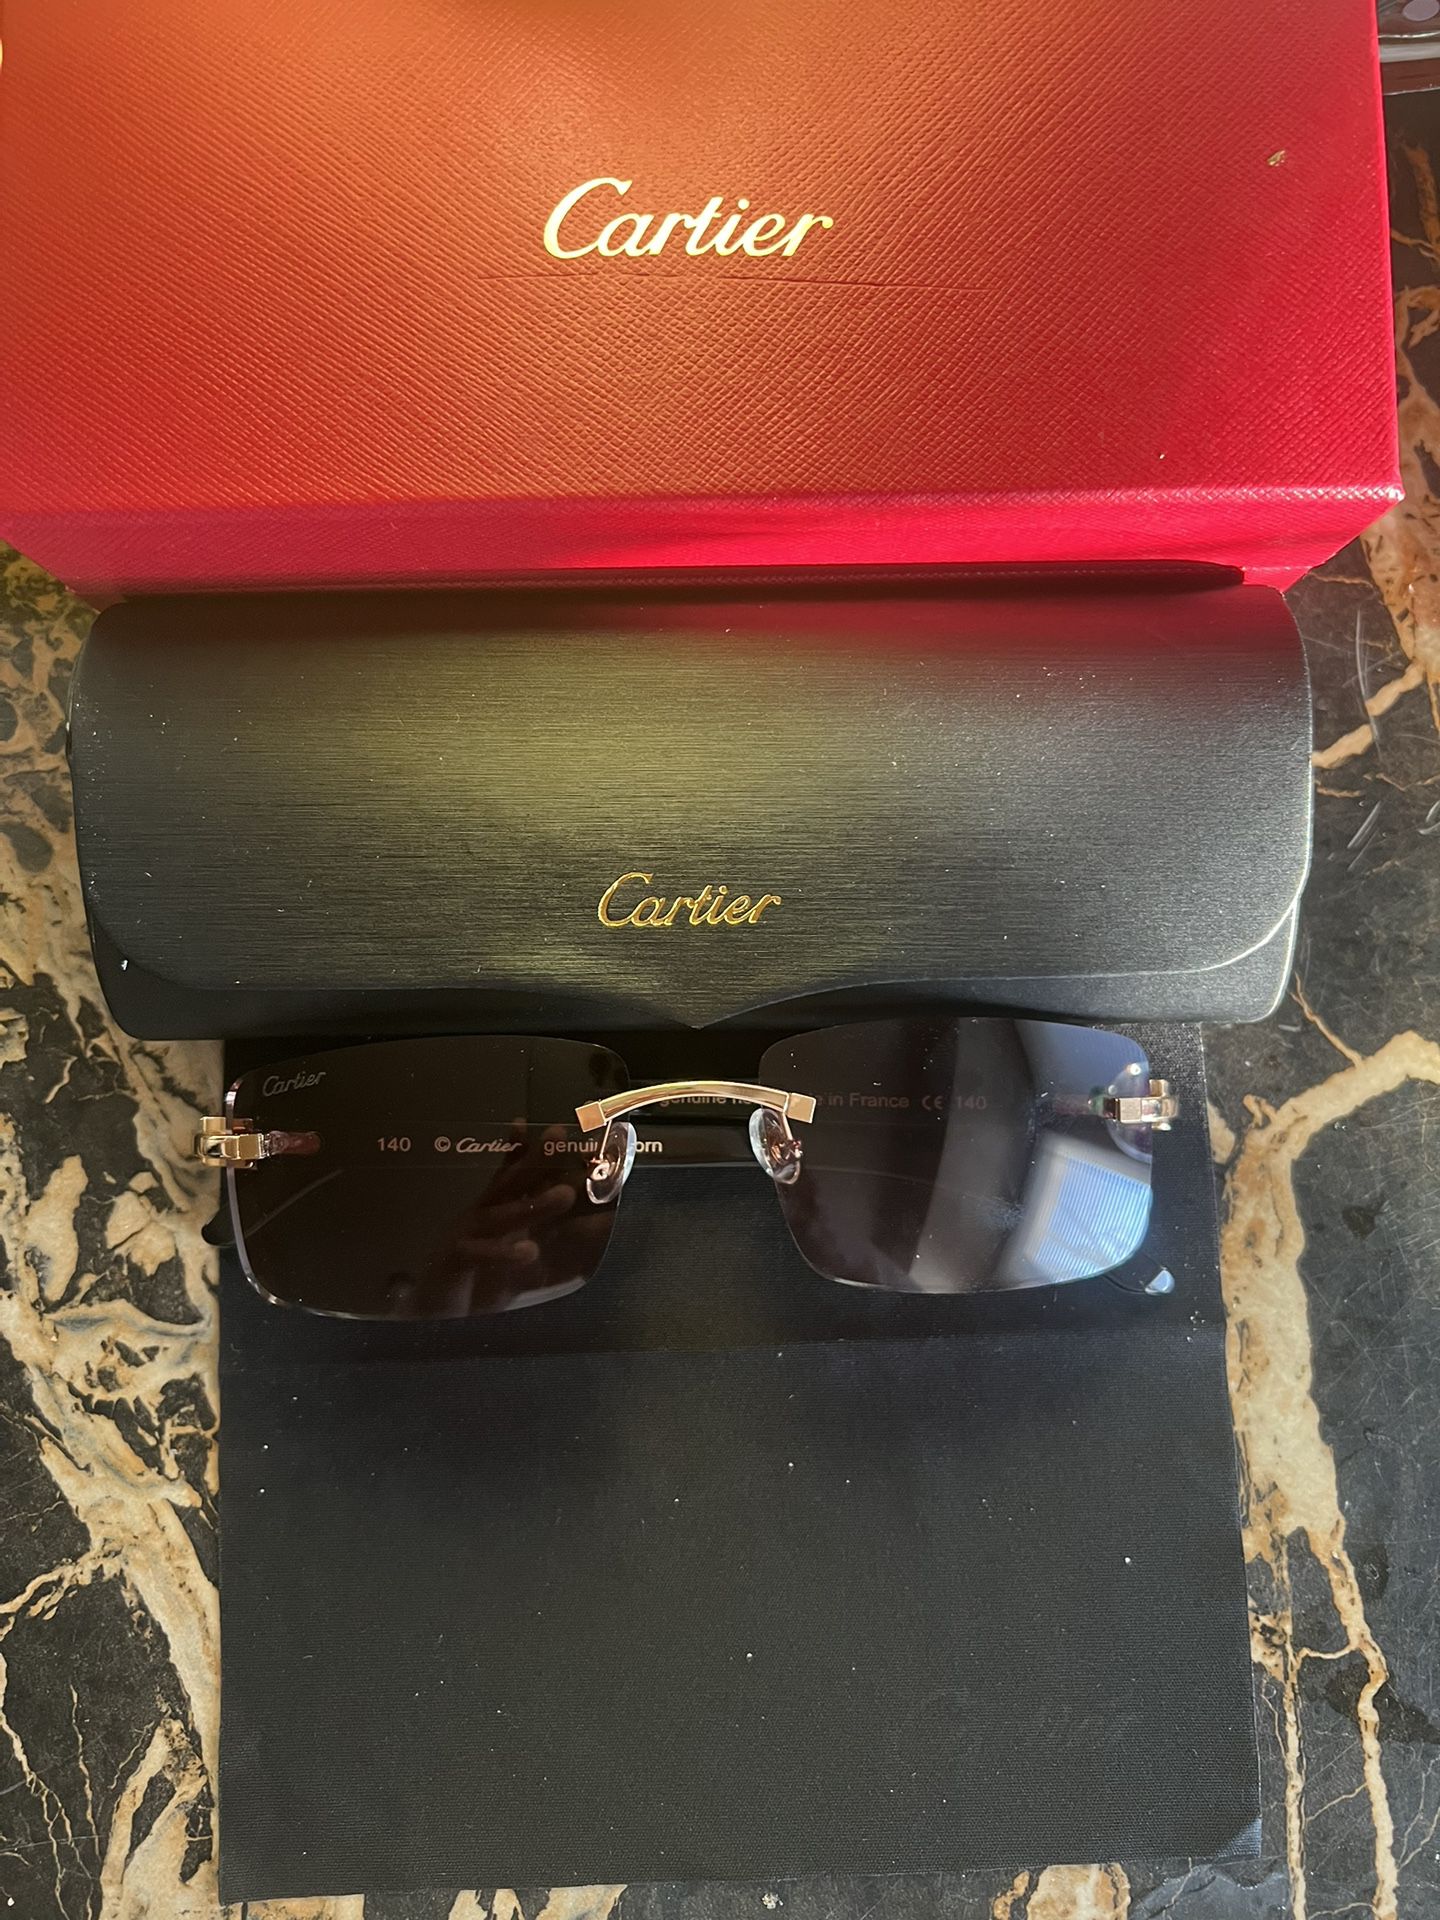 Cartier sunglasses (Buffs) for Sale in Dearborn Heights, MI - OfferUp